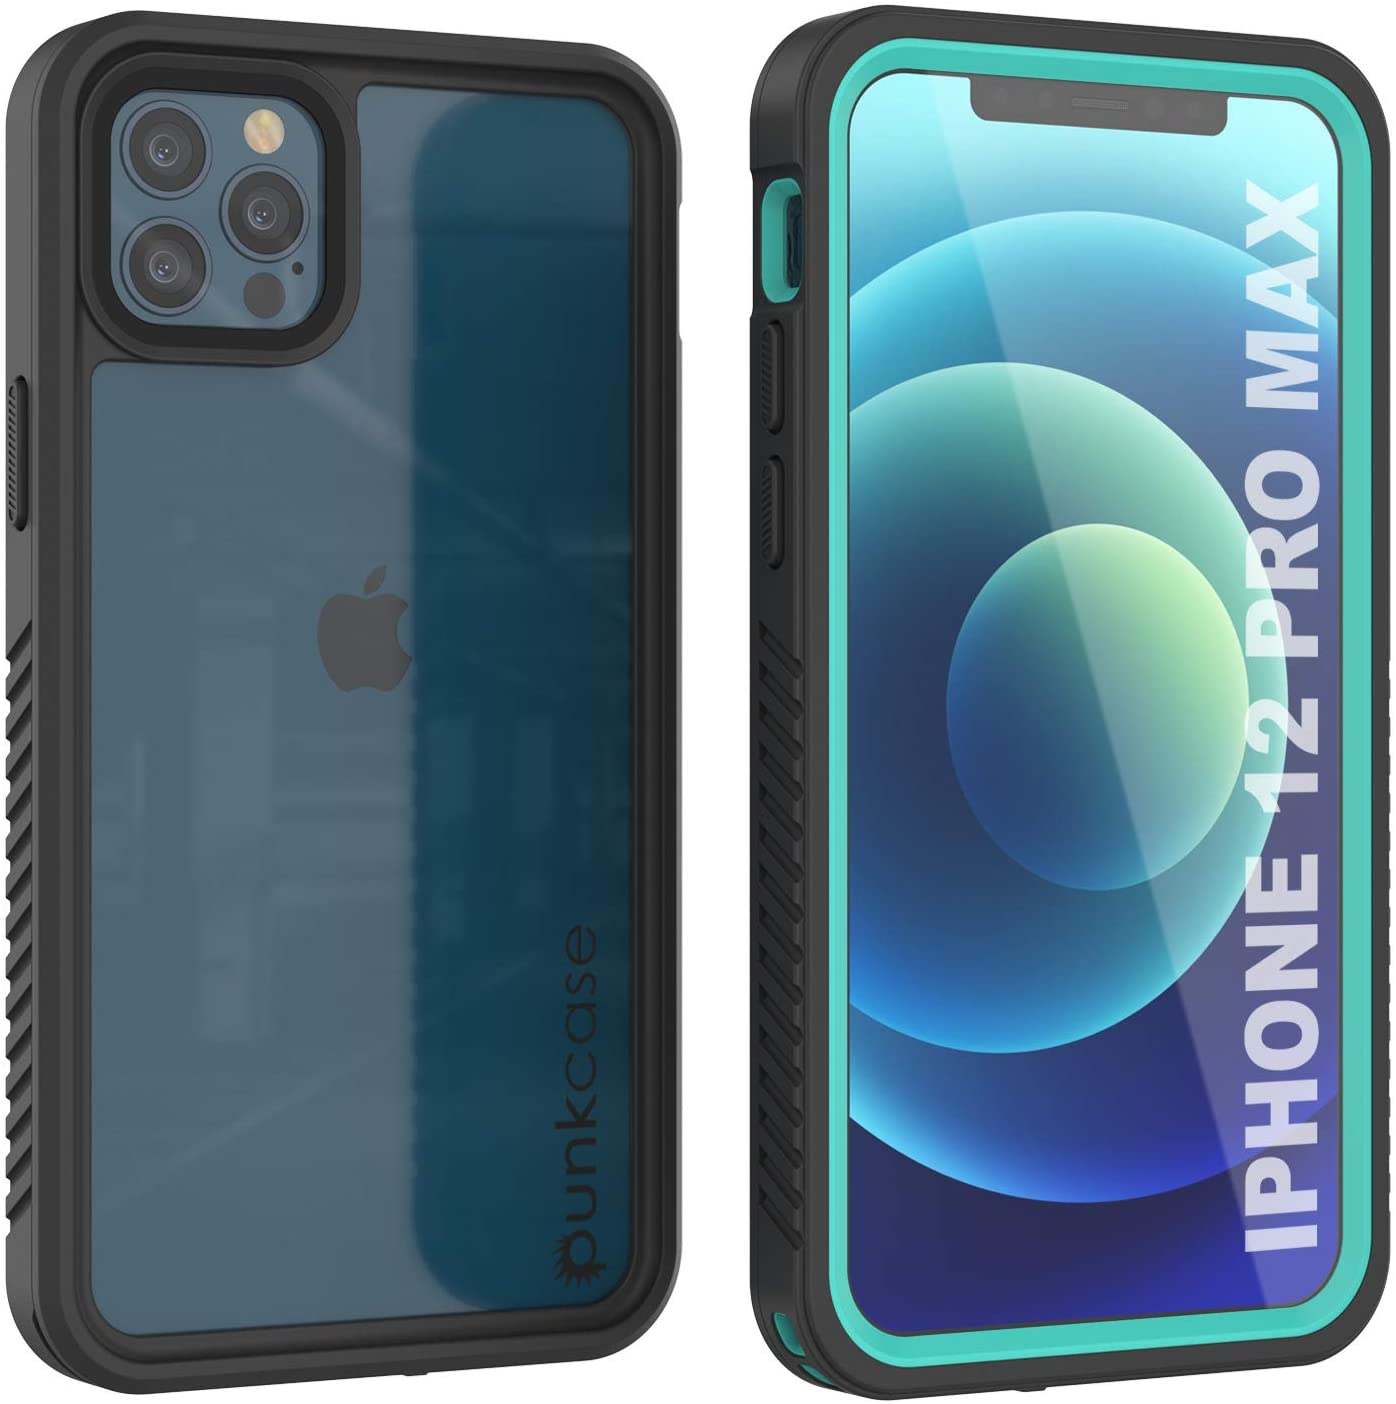 iPhone 12 Pro Max Waterproof Case, Punkcase [Extreme Series] Armor Cover W/ Built In Screen Protector [Teal] (Color in image: Teal)